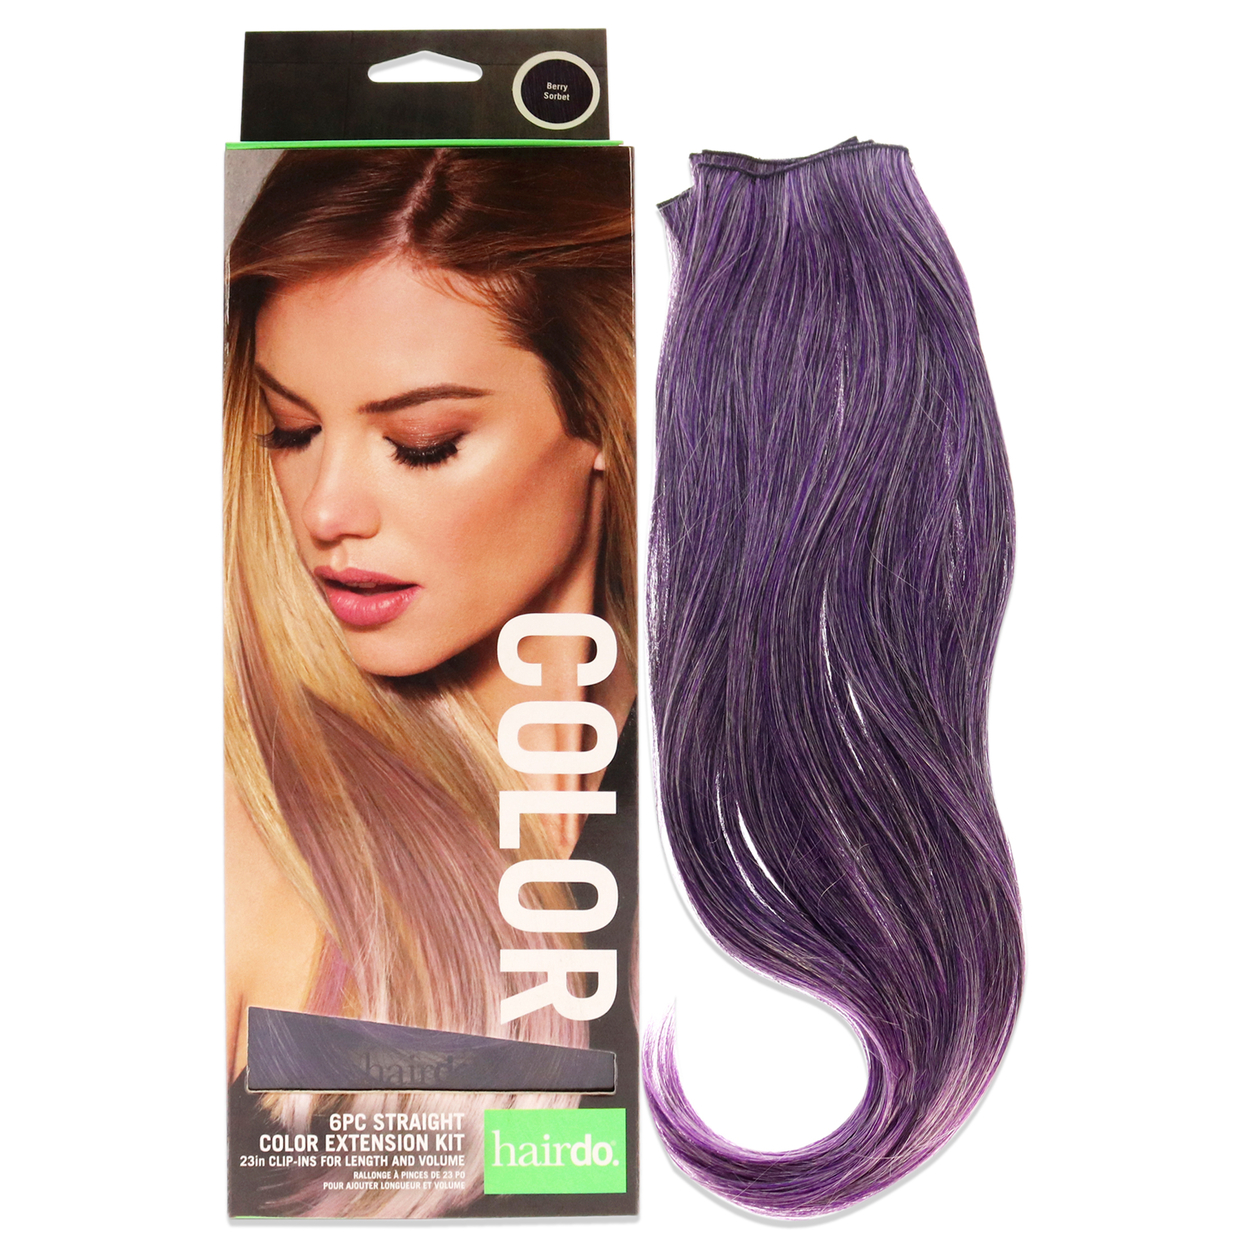 Hairdo Straight Color Extension Kit - Berry Sorbet Hair Extension 6 X 23 Inch